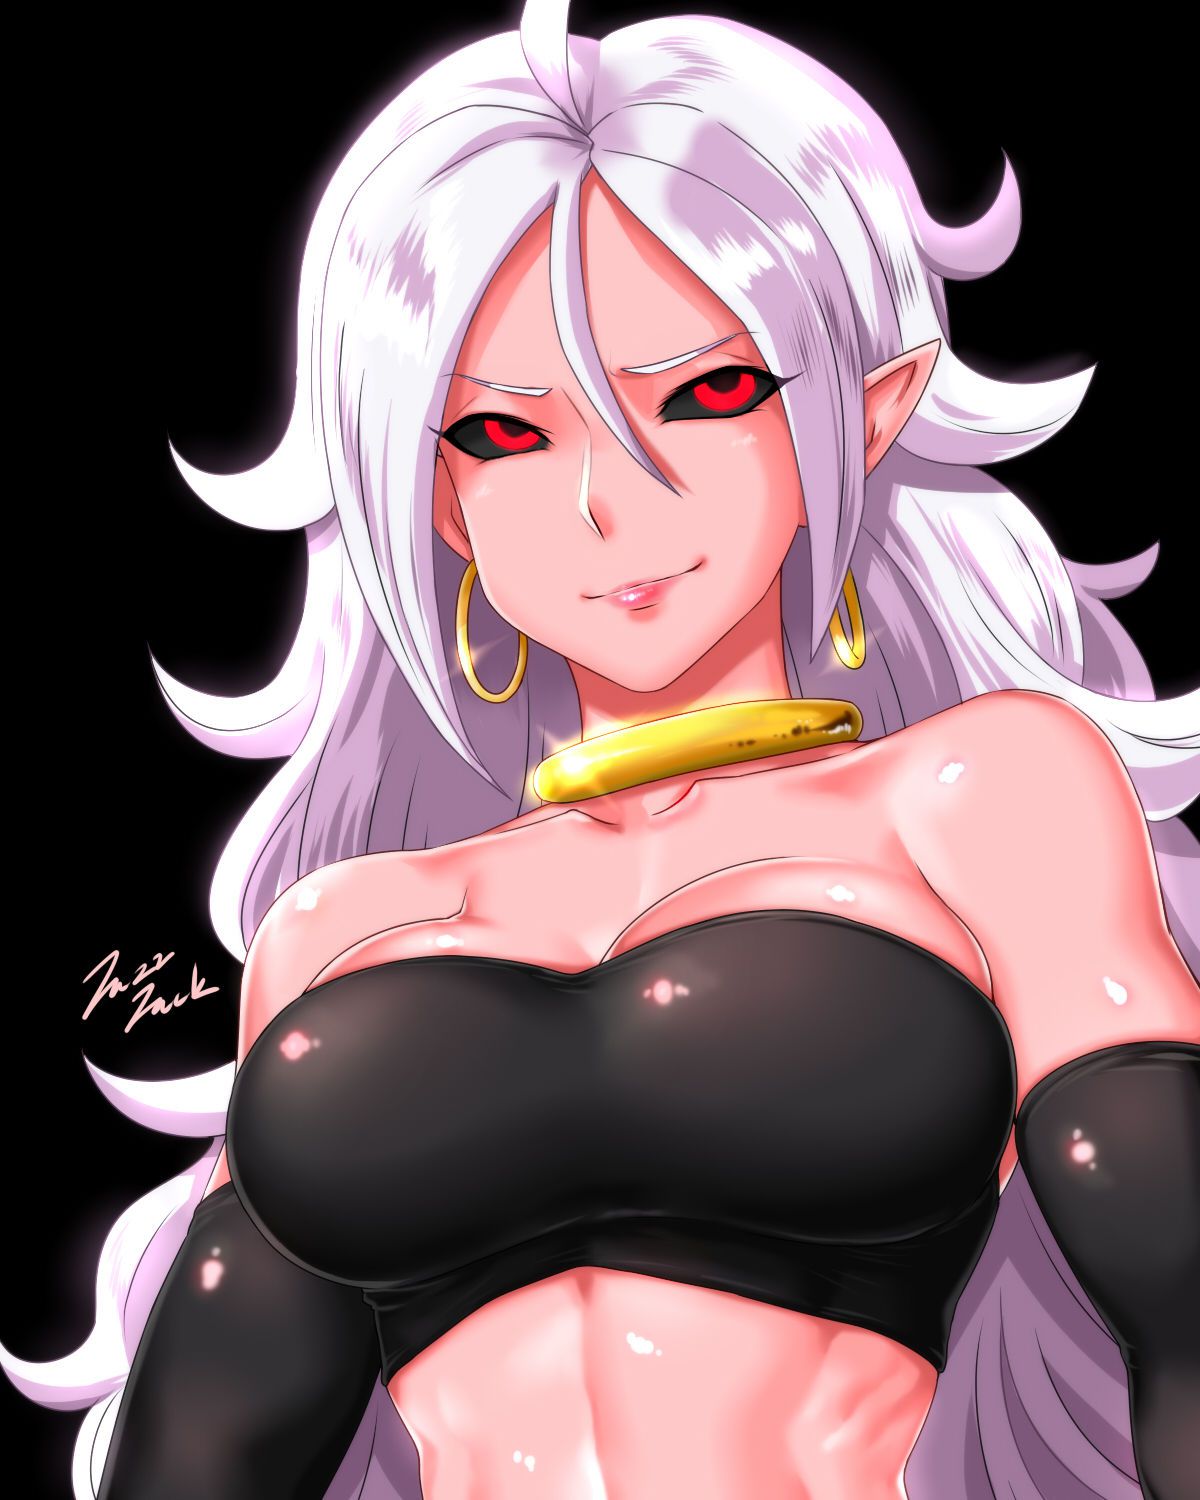 My Favorite Android 21 Pics 90